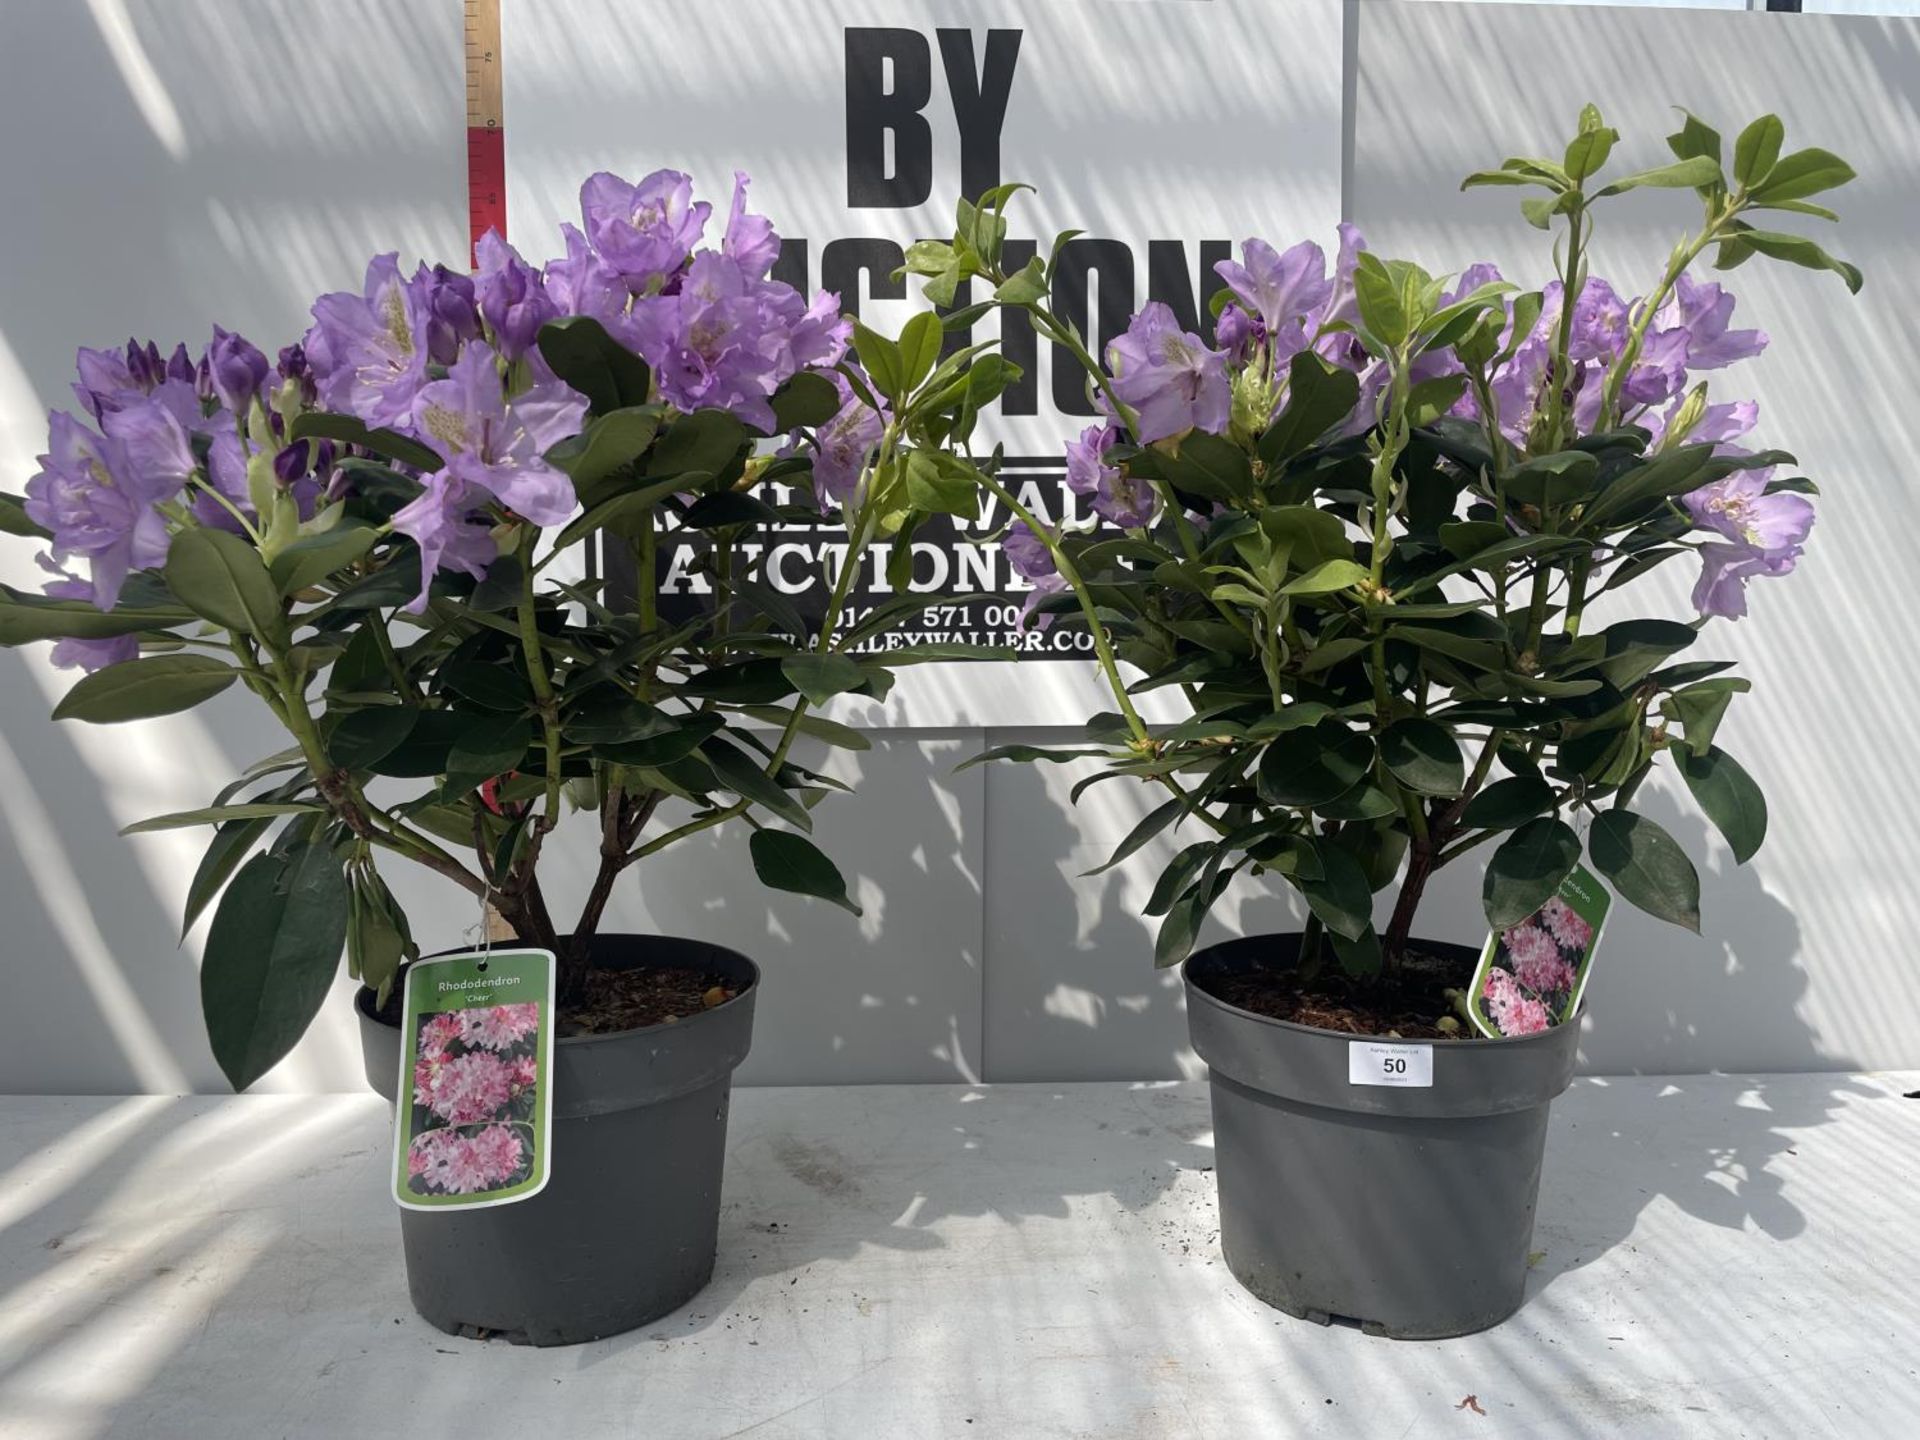 TWO PURPLE RHODODENDRONS 'CHEER' 60CM IN HEIGHT IN POTS PLUS VAT